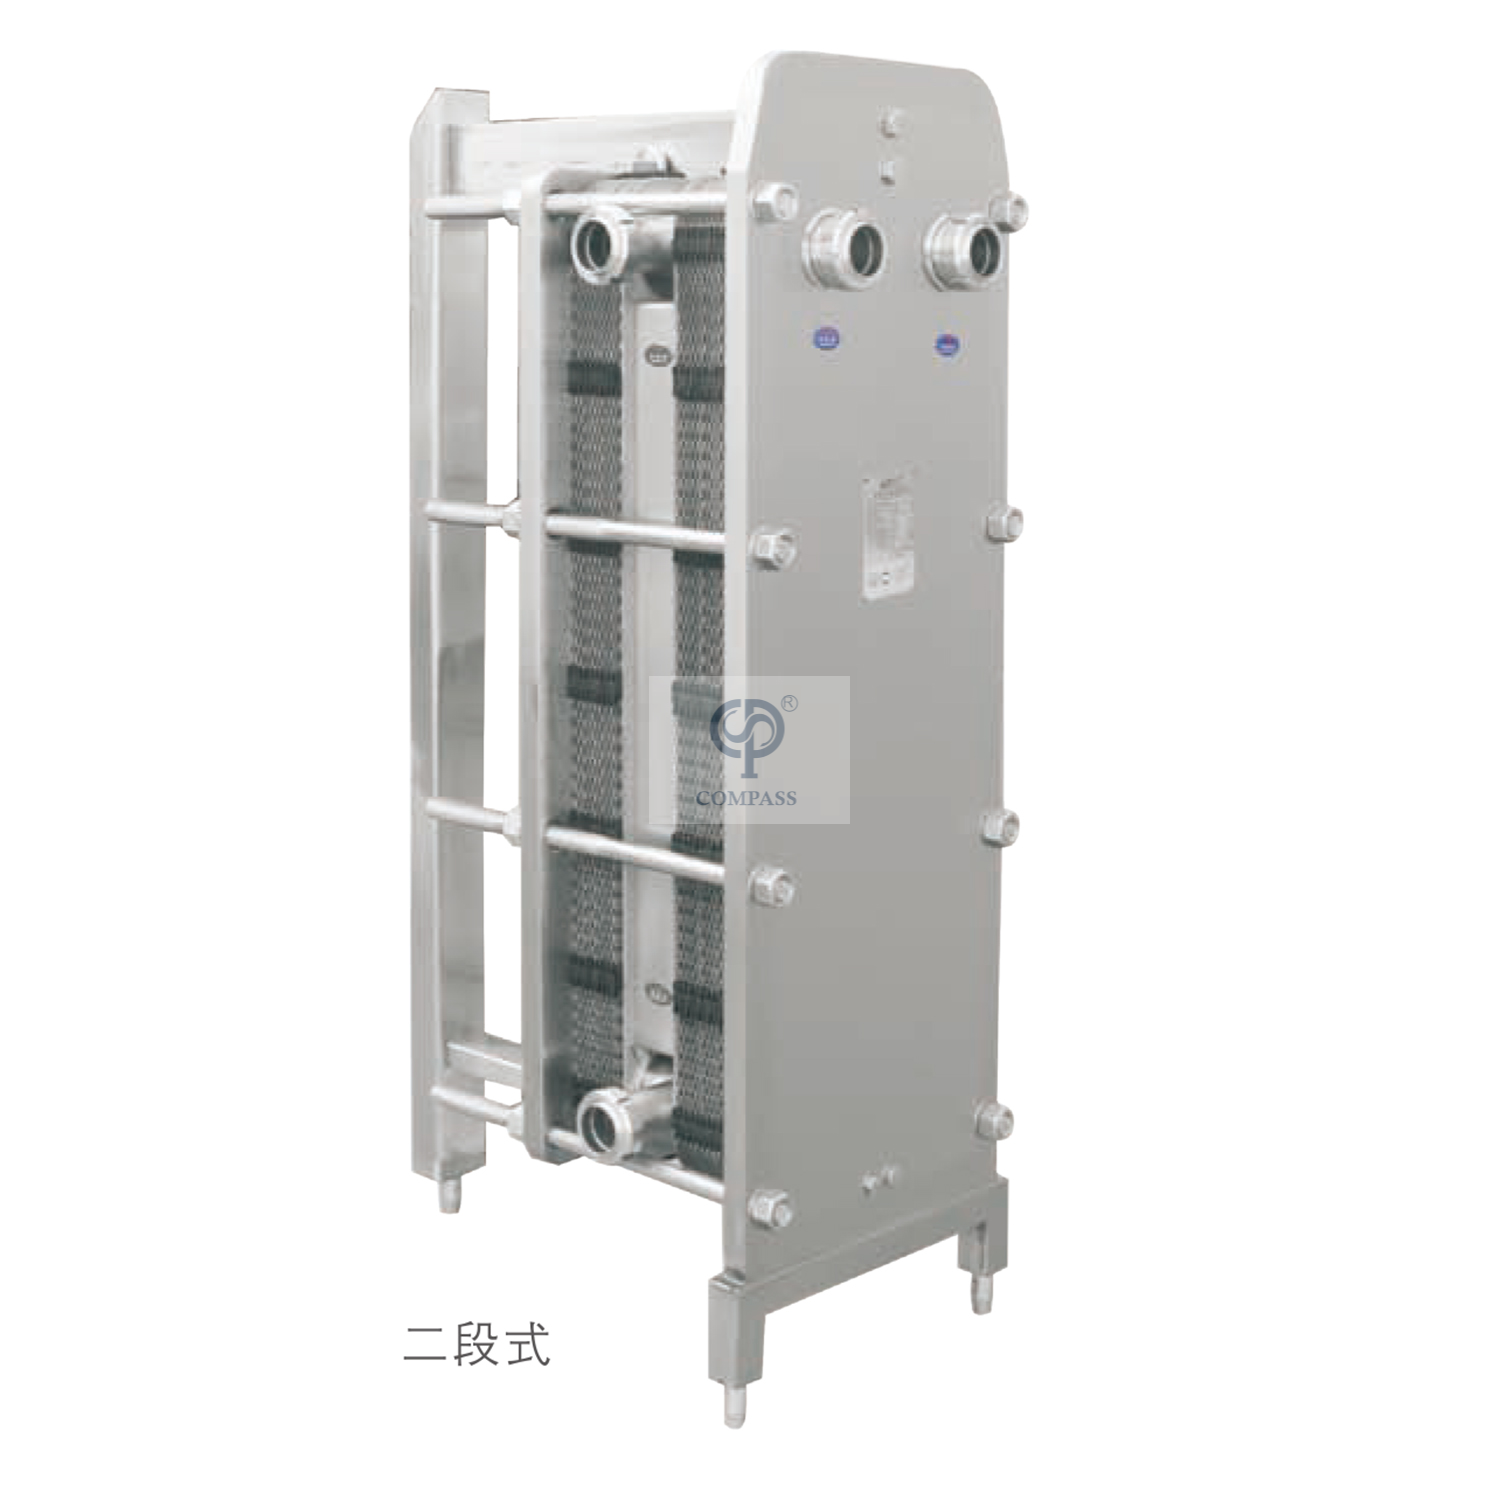 Stainless Steel Multistage Three Stages Plate Heat Exchanger For Milk Pasteurization